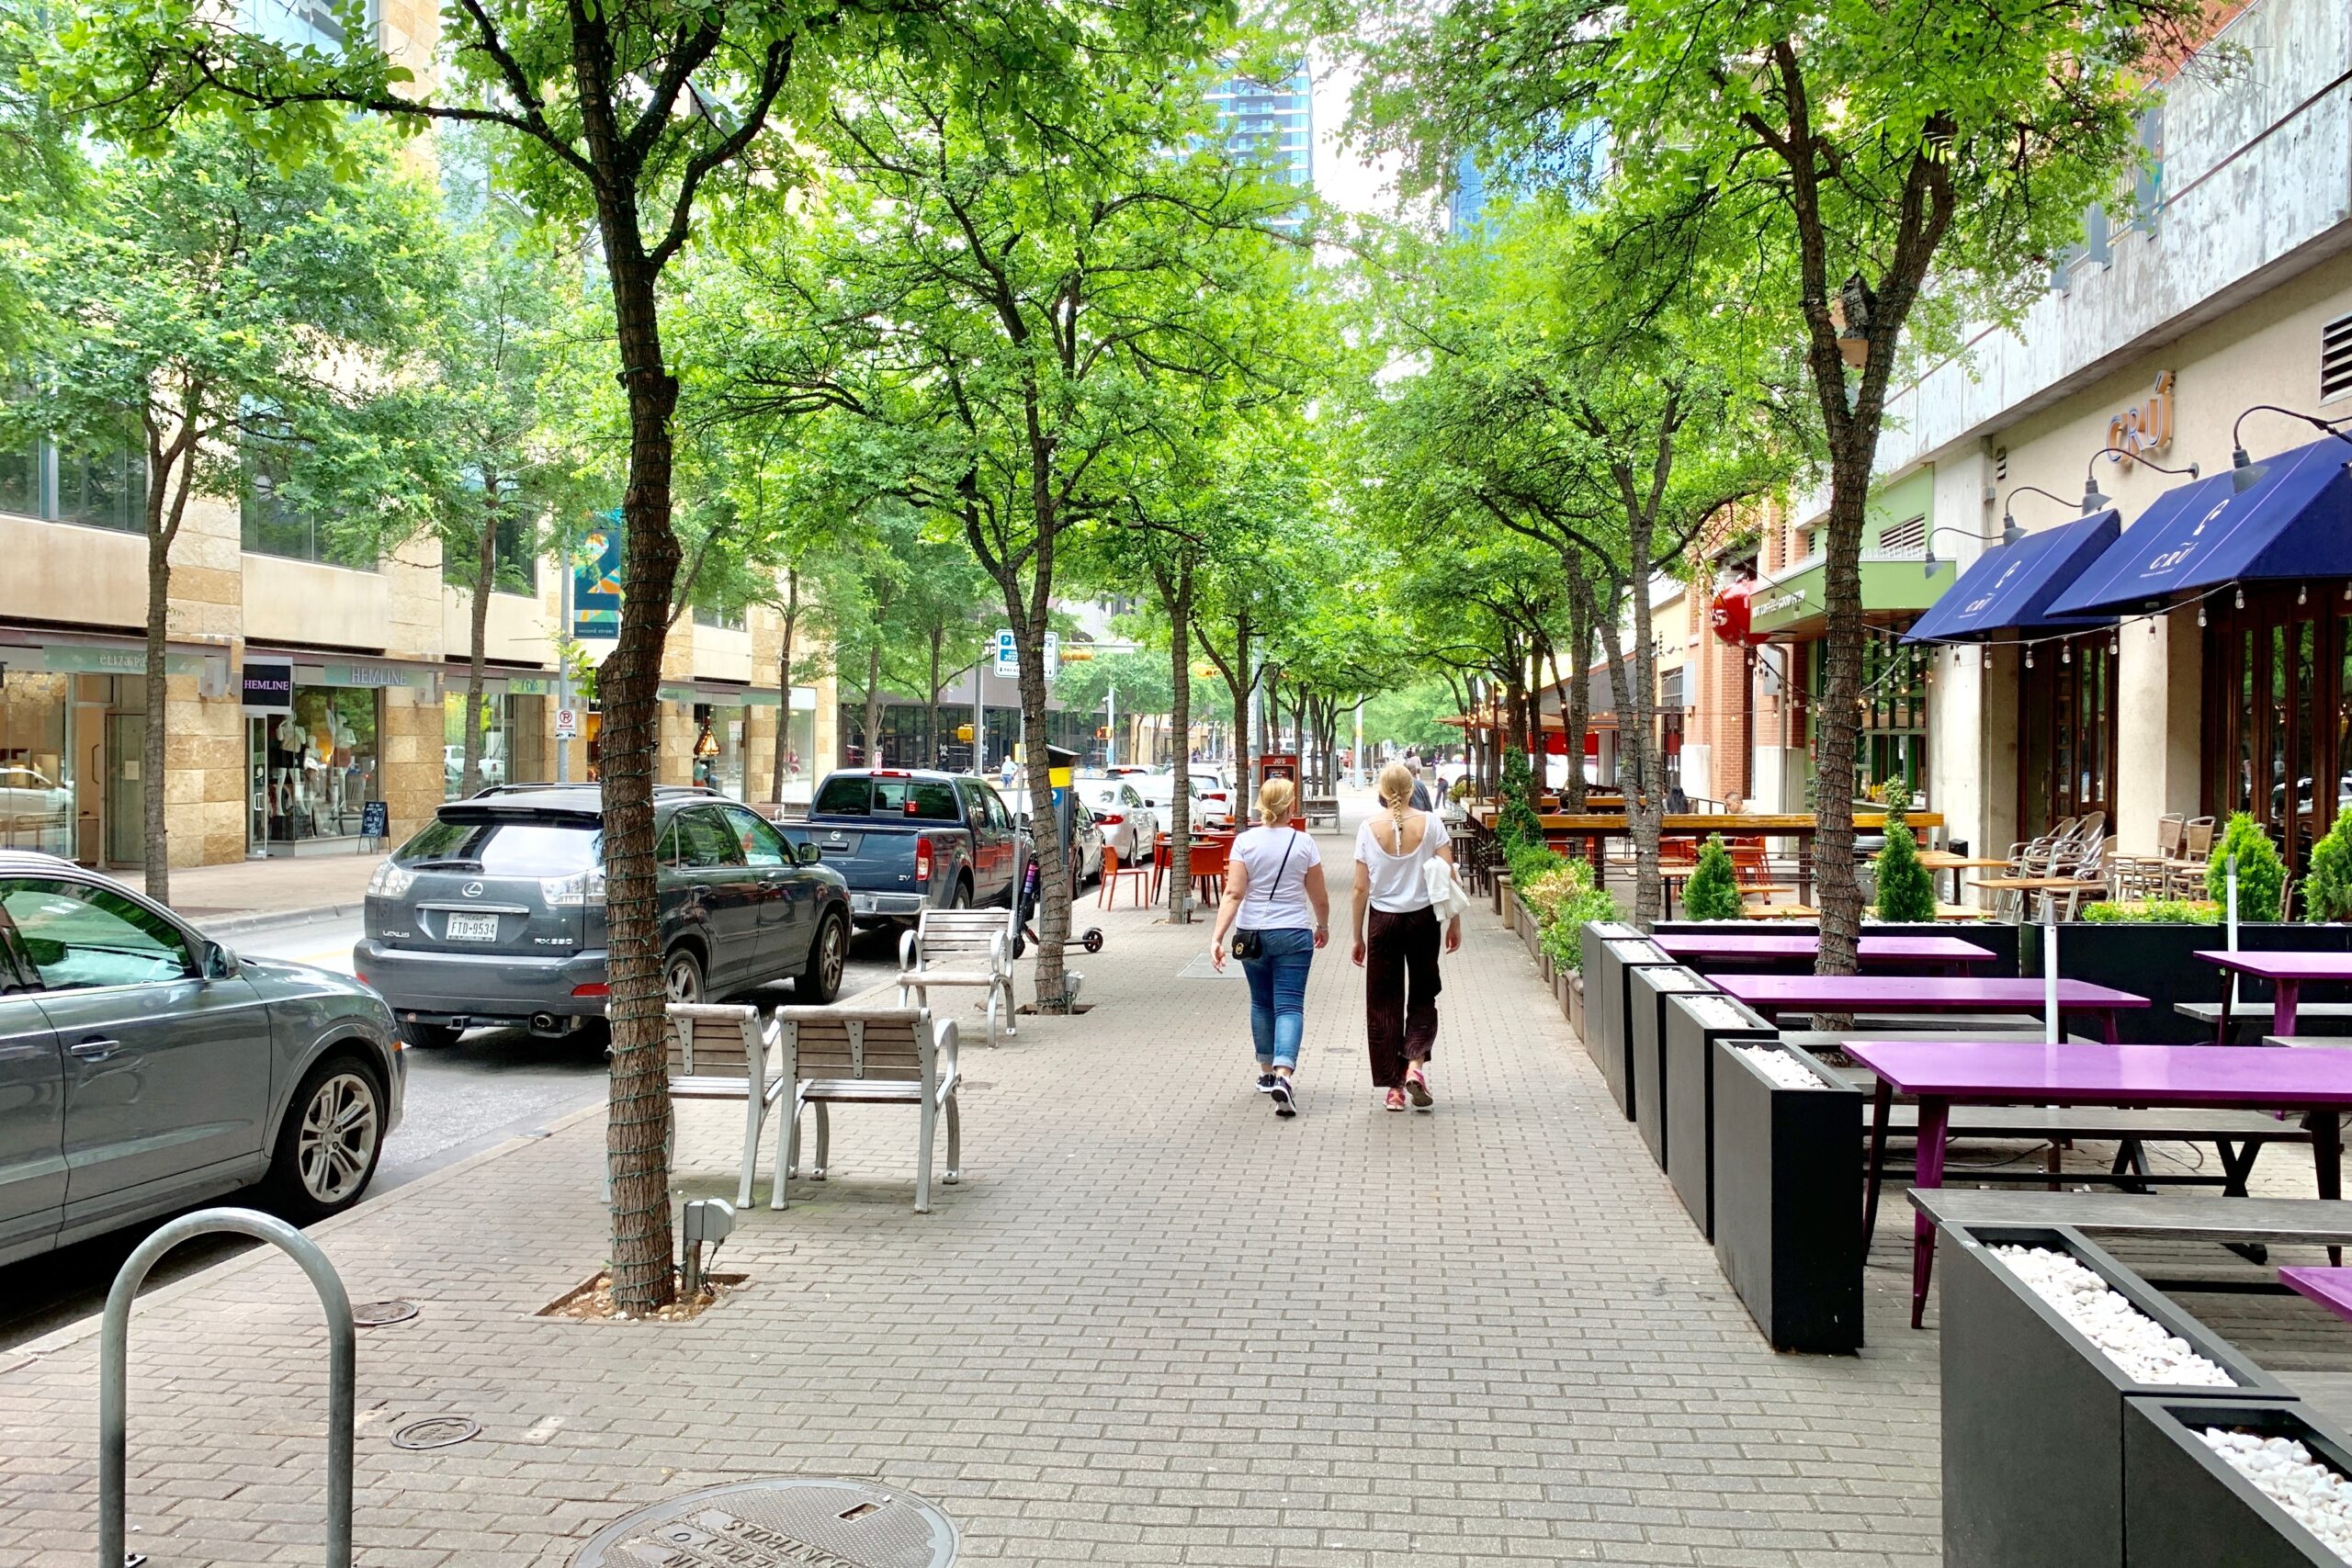 Two women in white shirts walking down a wide sidewalk with outdoor shops and purple benches